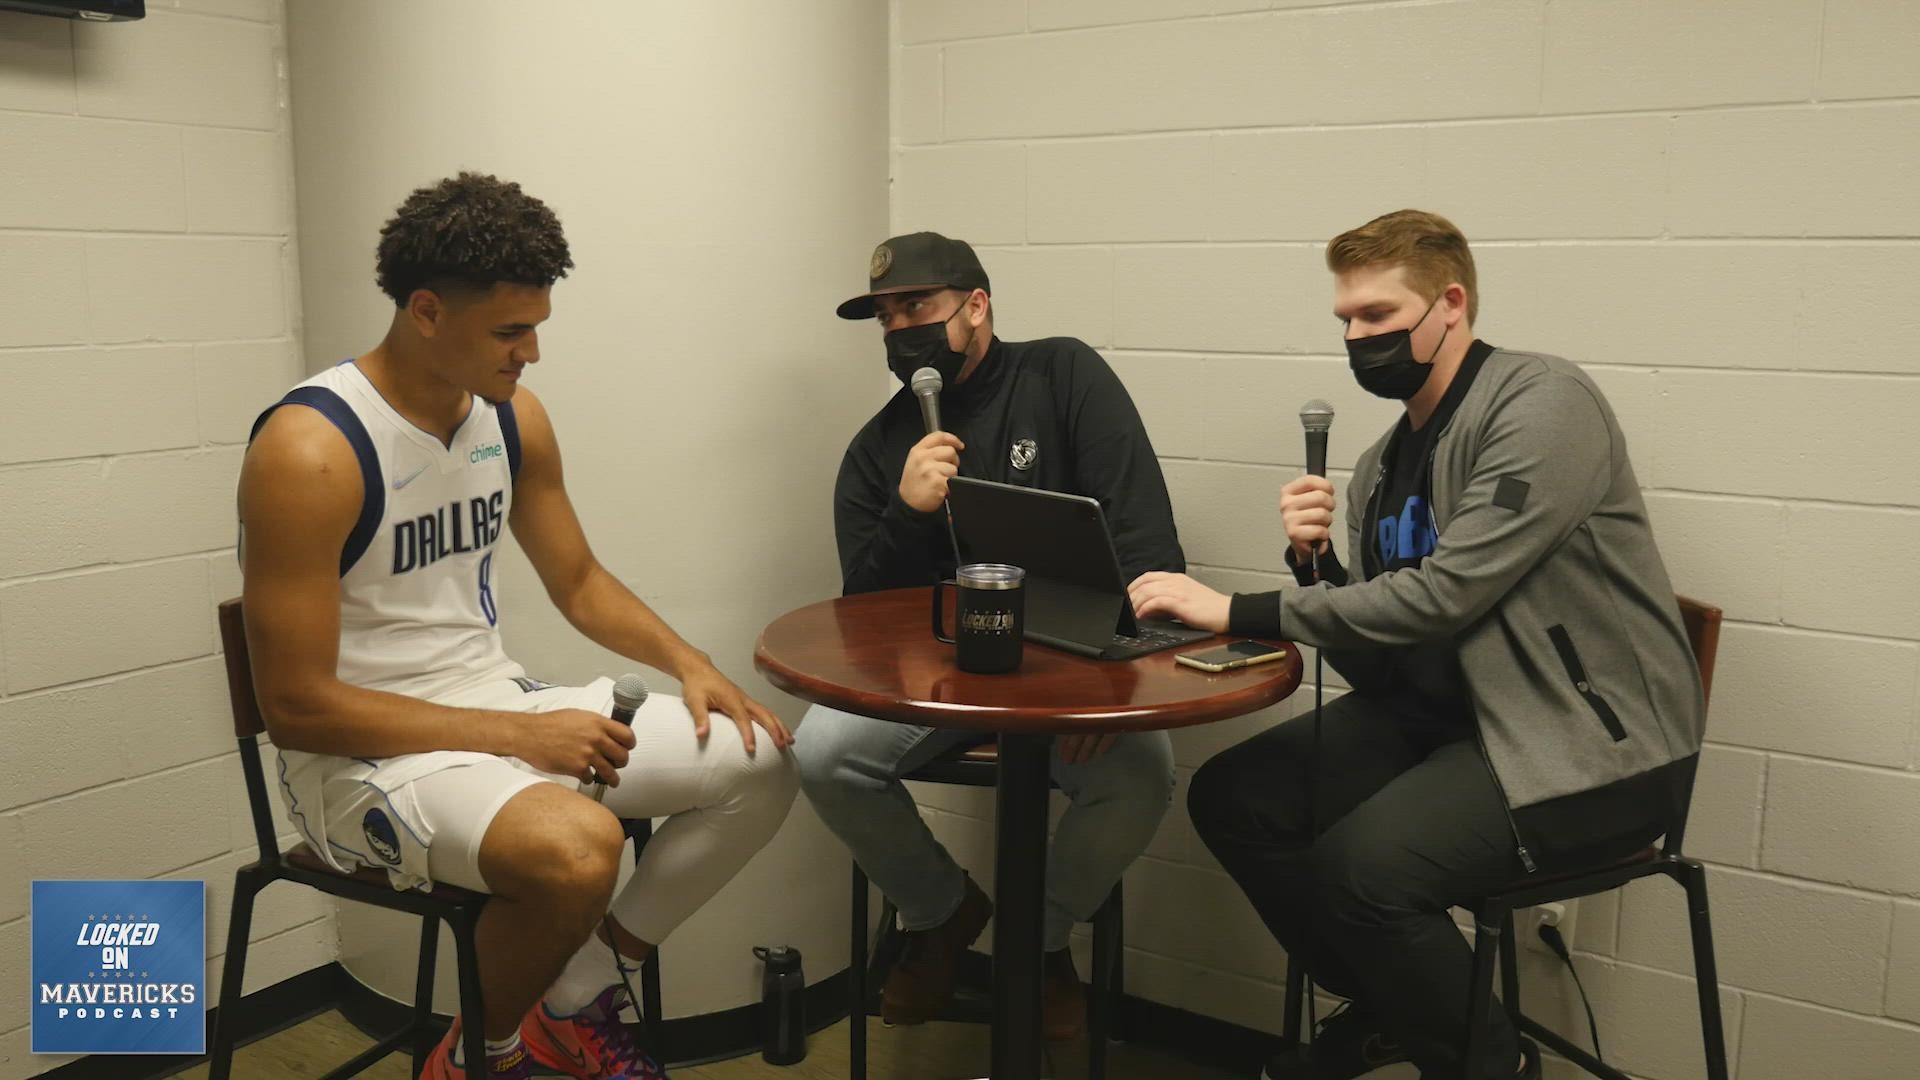 Josh Green talks to to @NickVanExit and @IsaacLHarris about the upcoming season during the Mavericks media day.